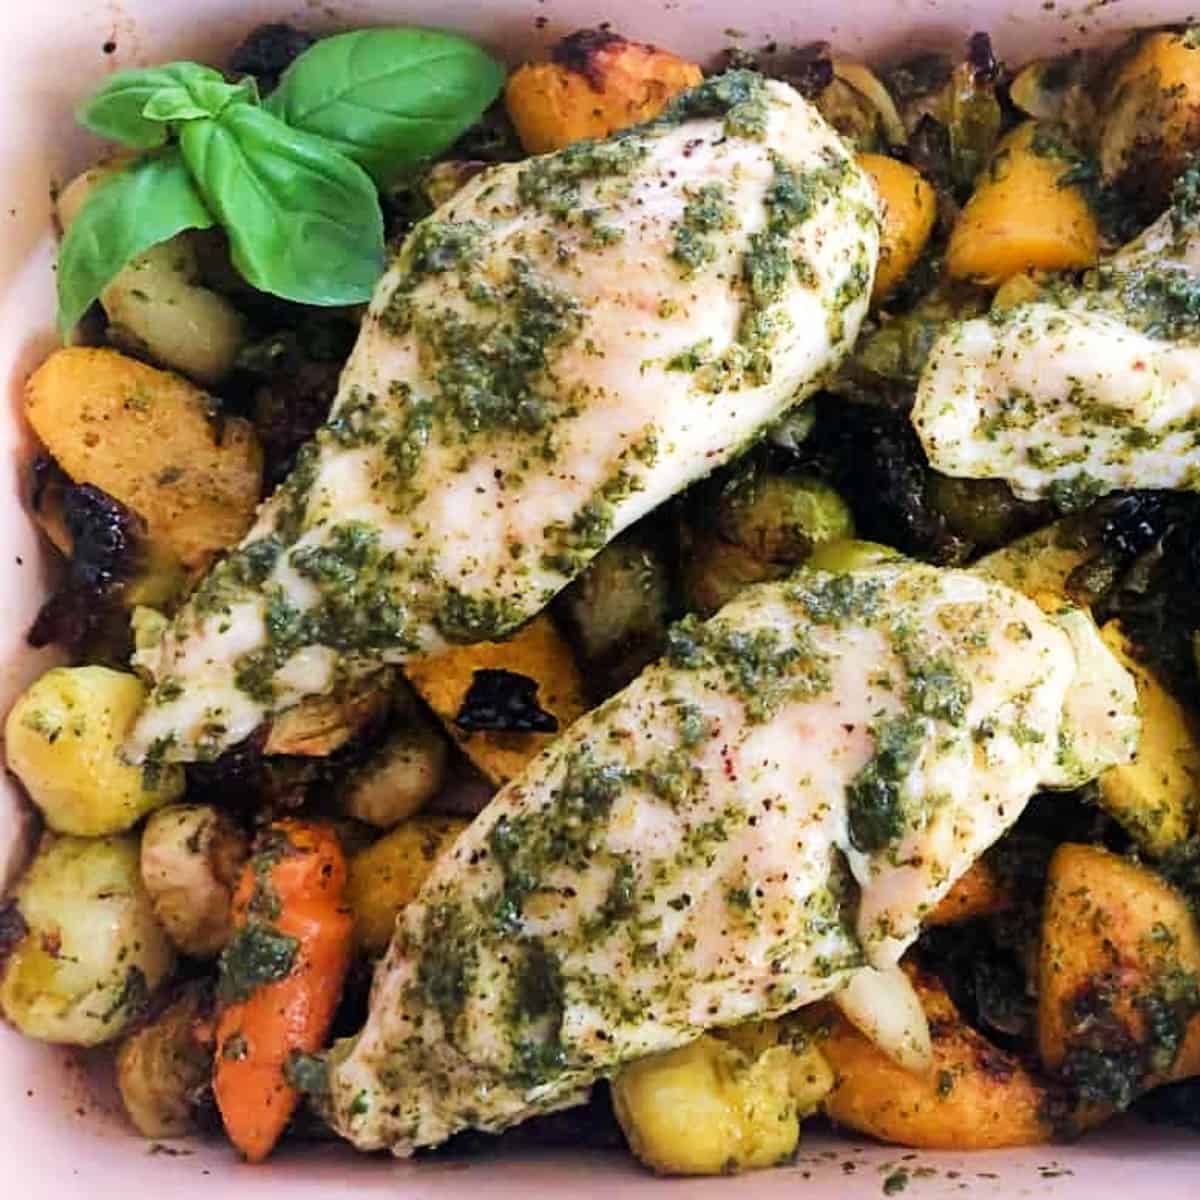 baked chicken with pesto and vegetables.